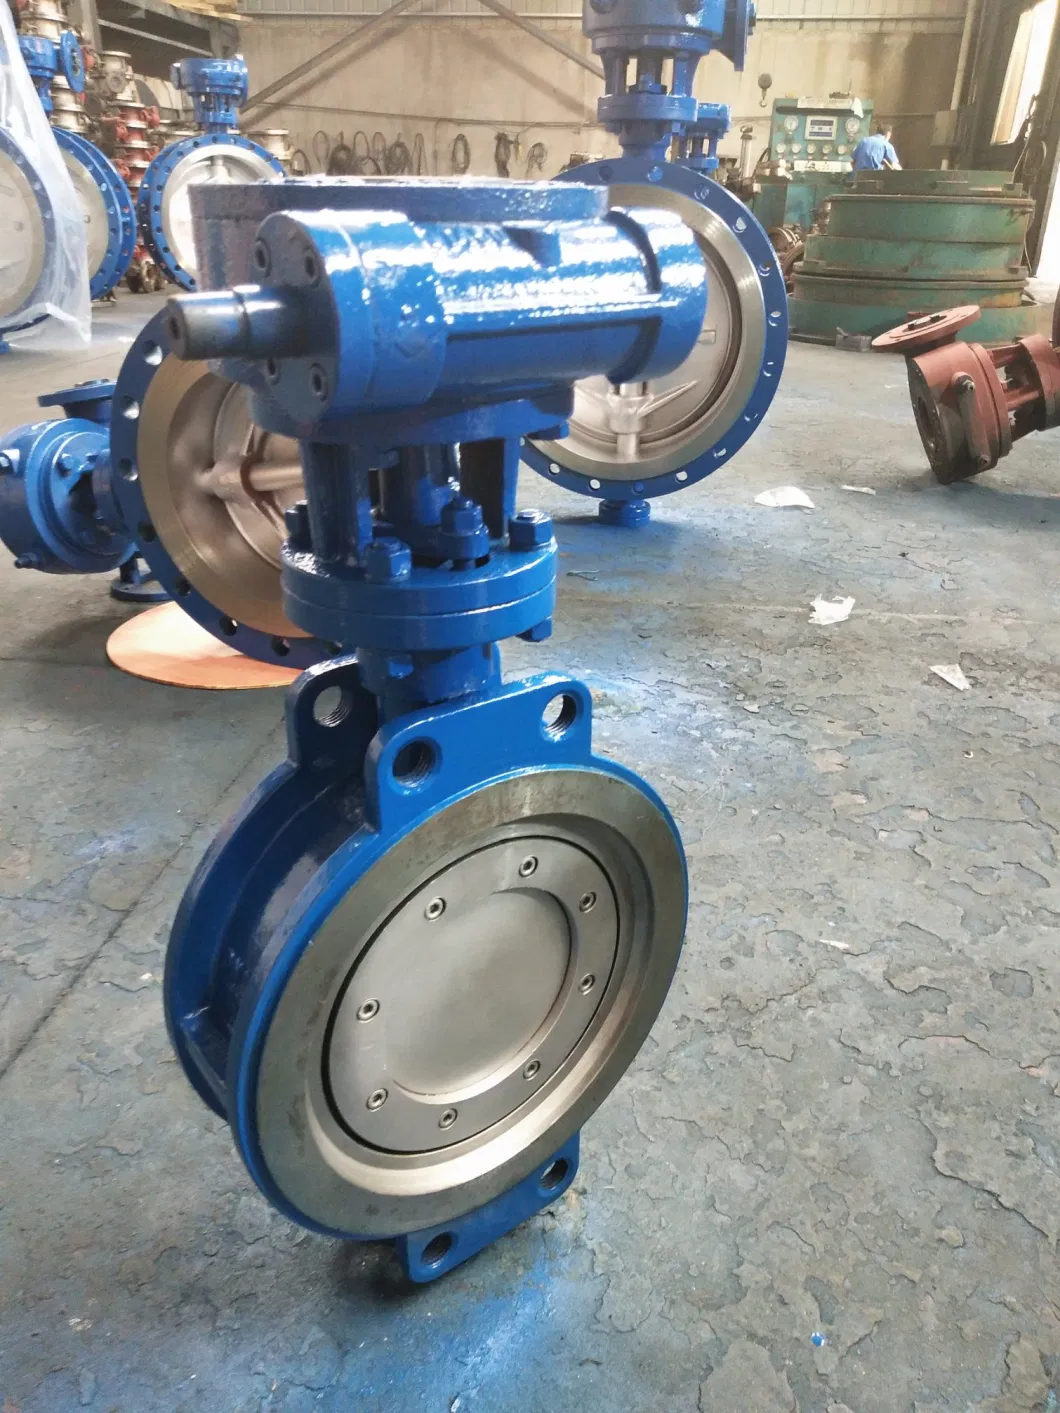 Metal Hard Sealed High-Temperature Resistant Wafer Butterfly Valve D373h Triple Eccentric Worm Gear Driven Wafer Type Butterfly Valve Pn10 / Pn16 / ANSI125